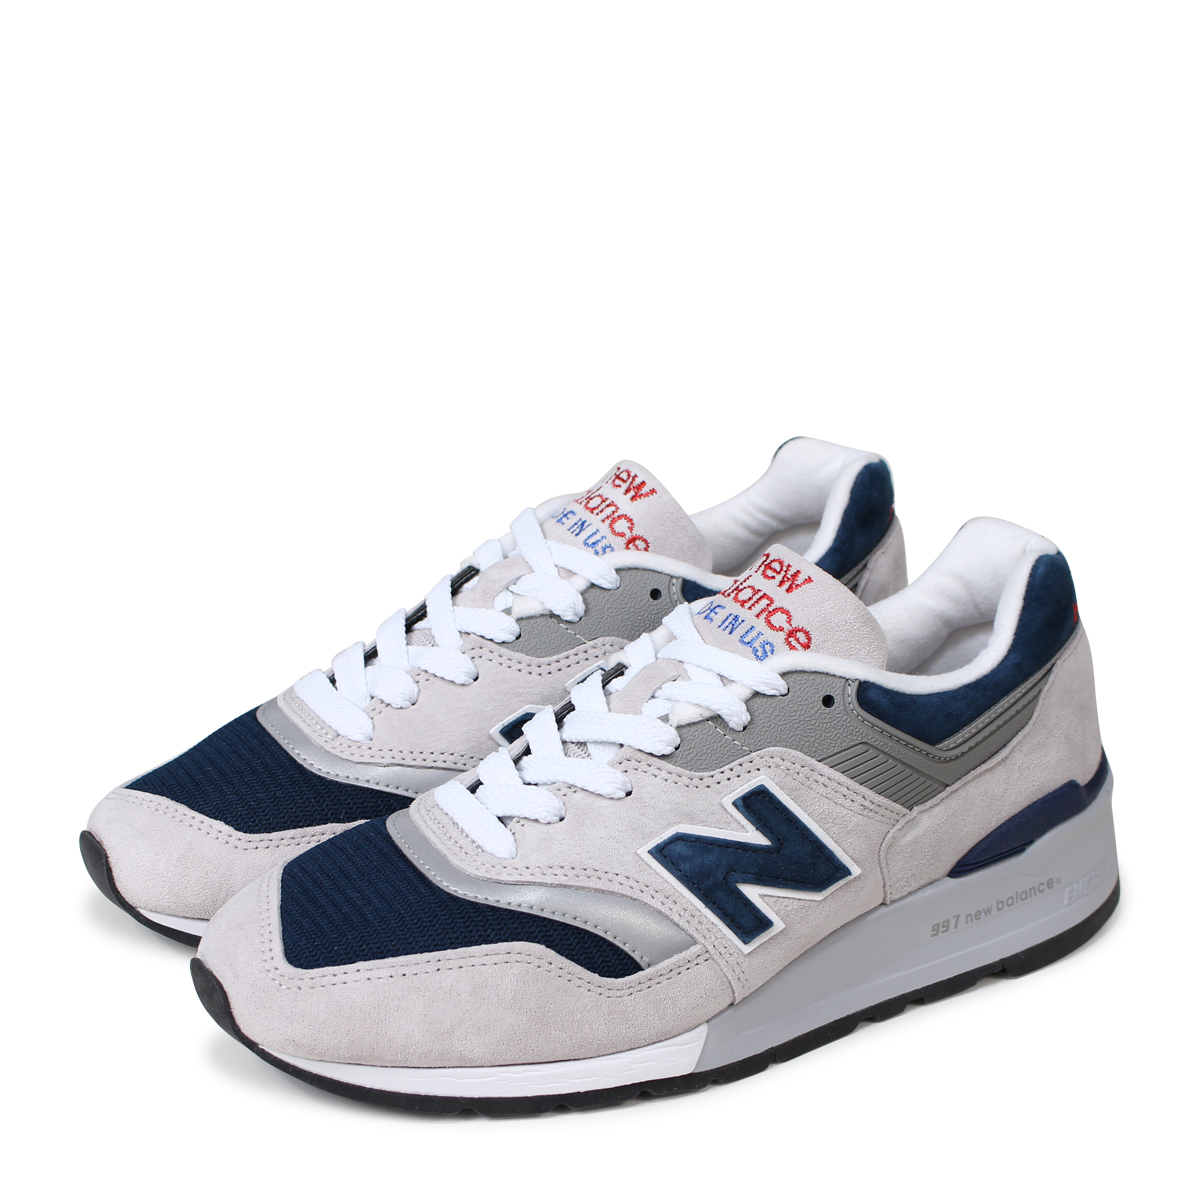 nb 997 made in usa